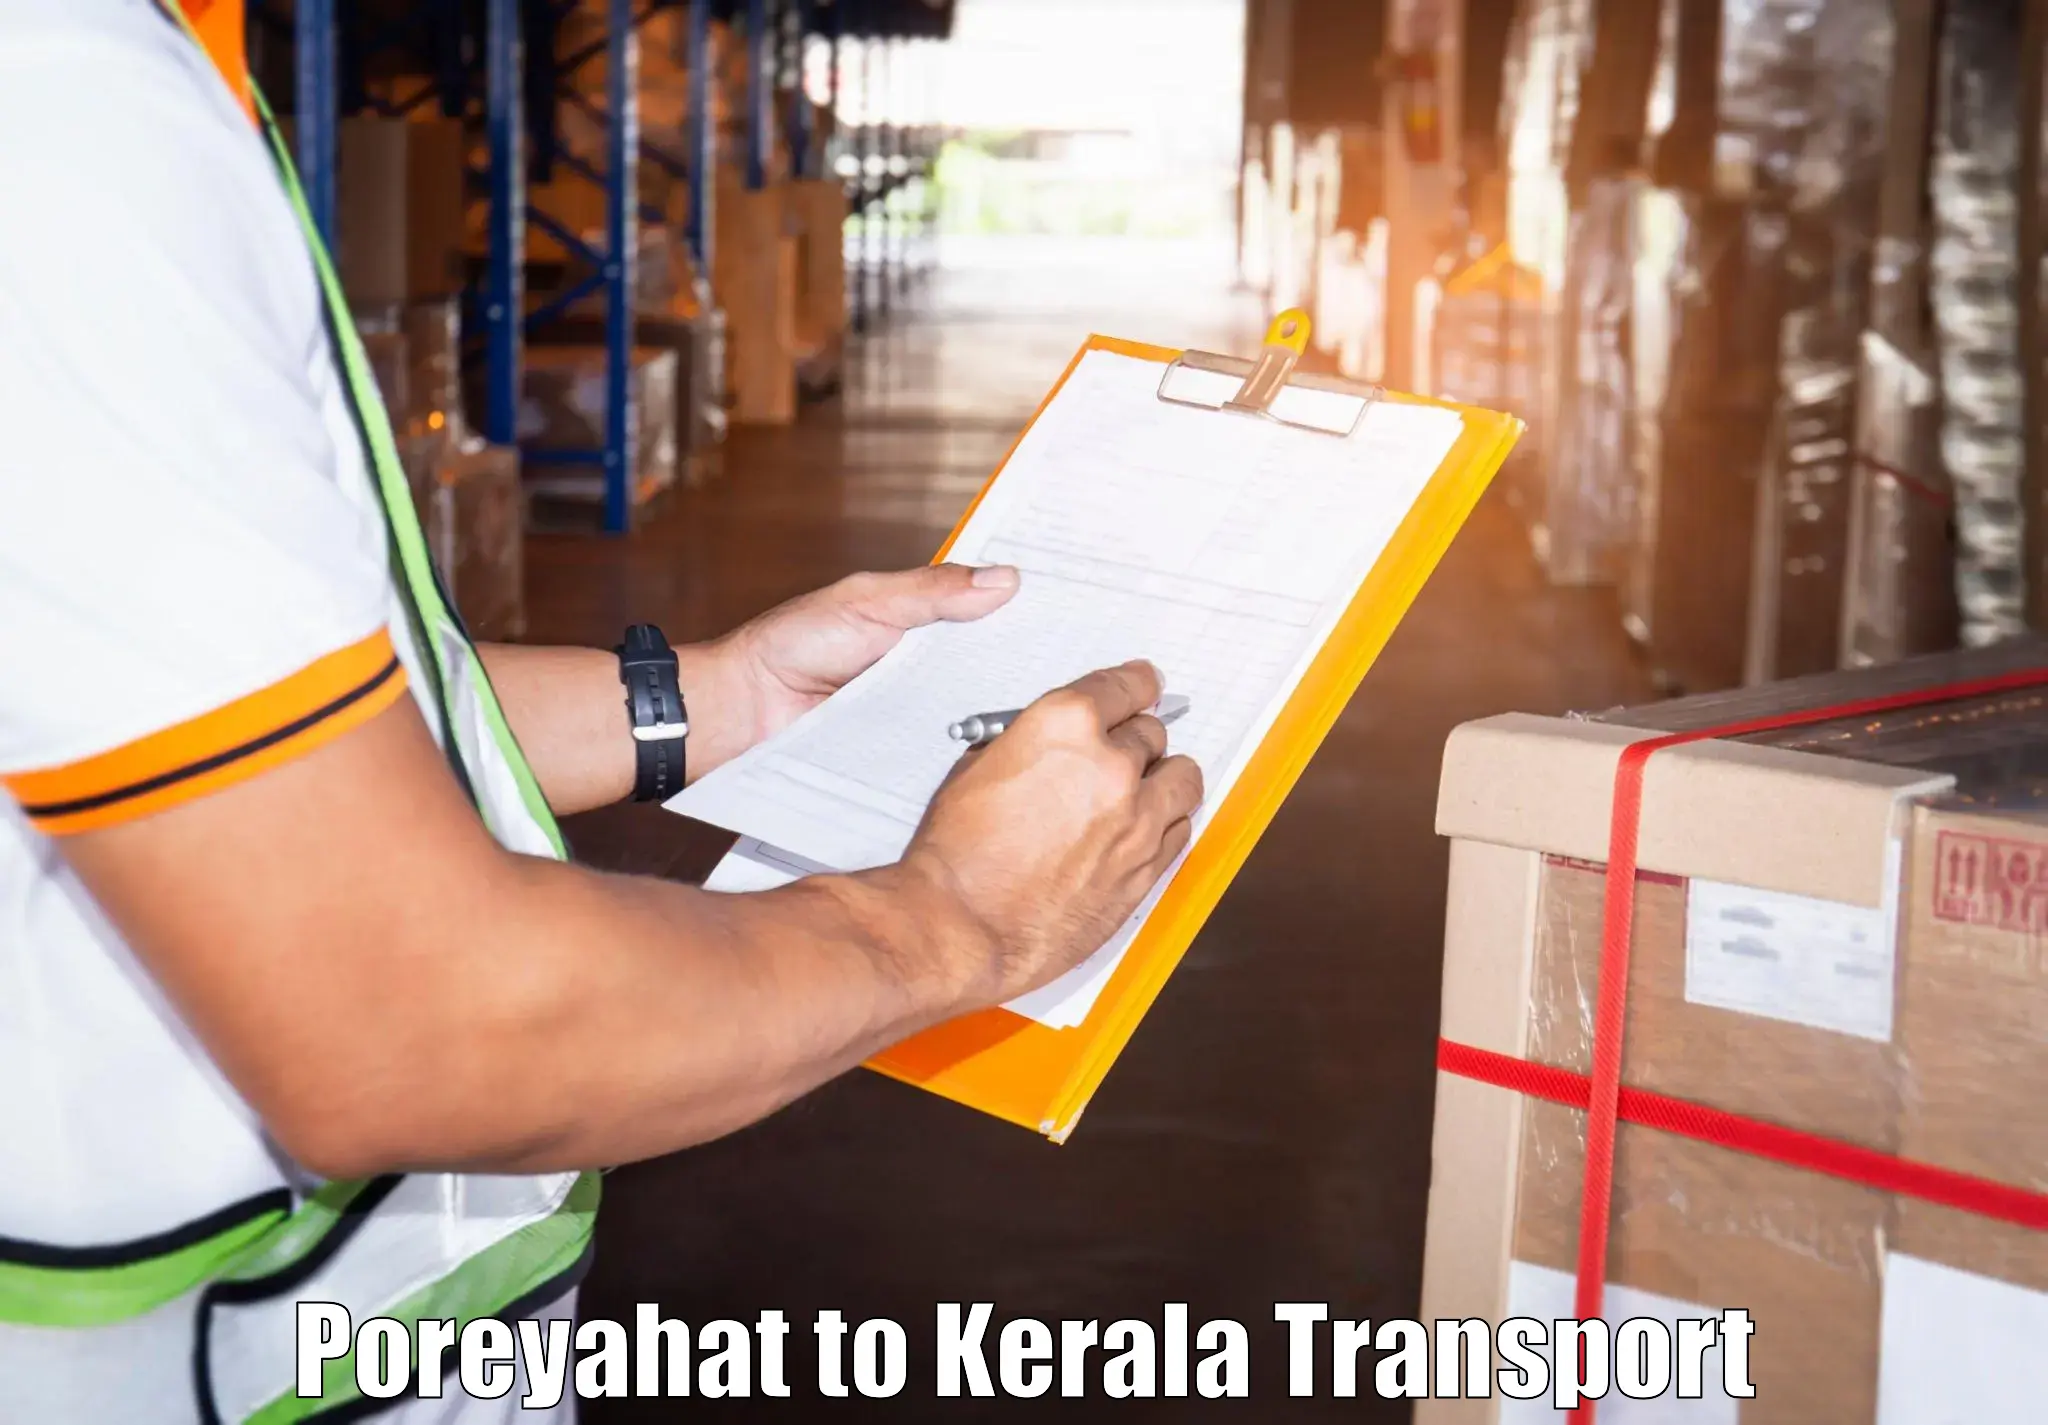 Container transport service Poreyahat to Kollam